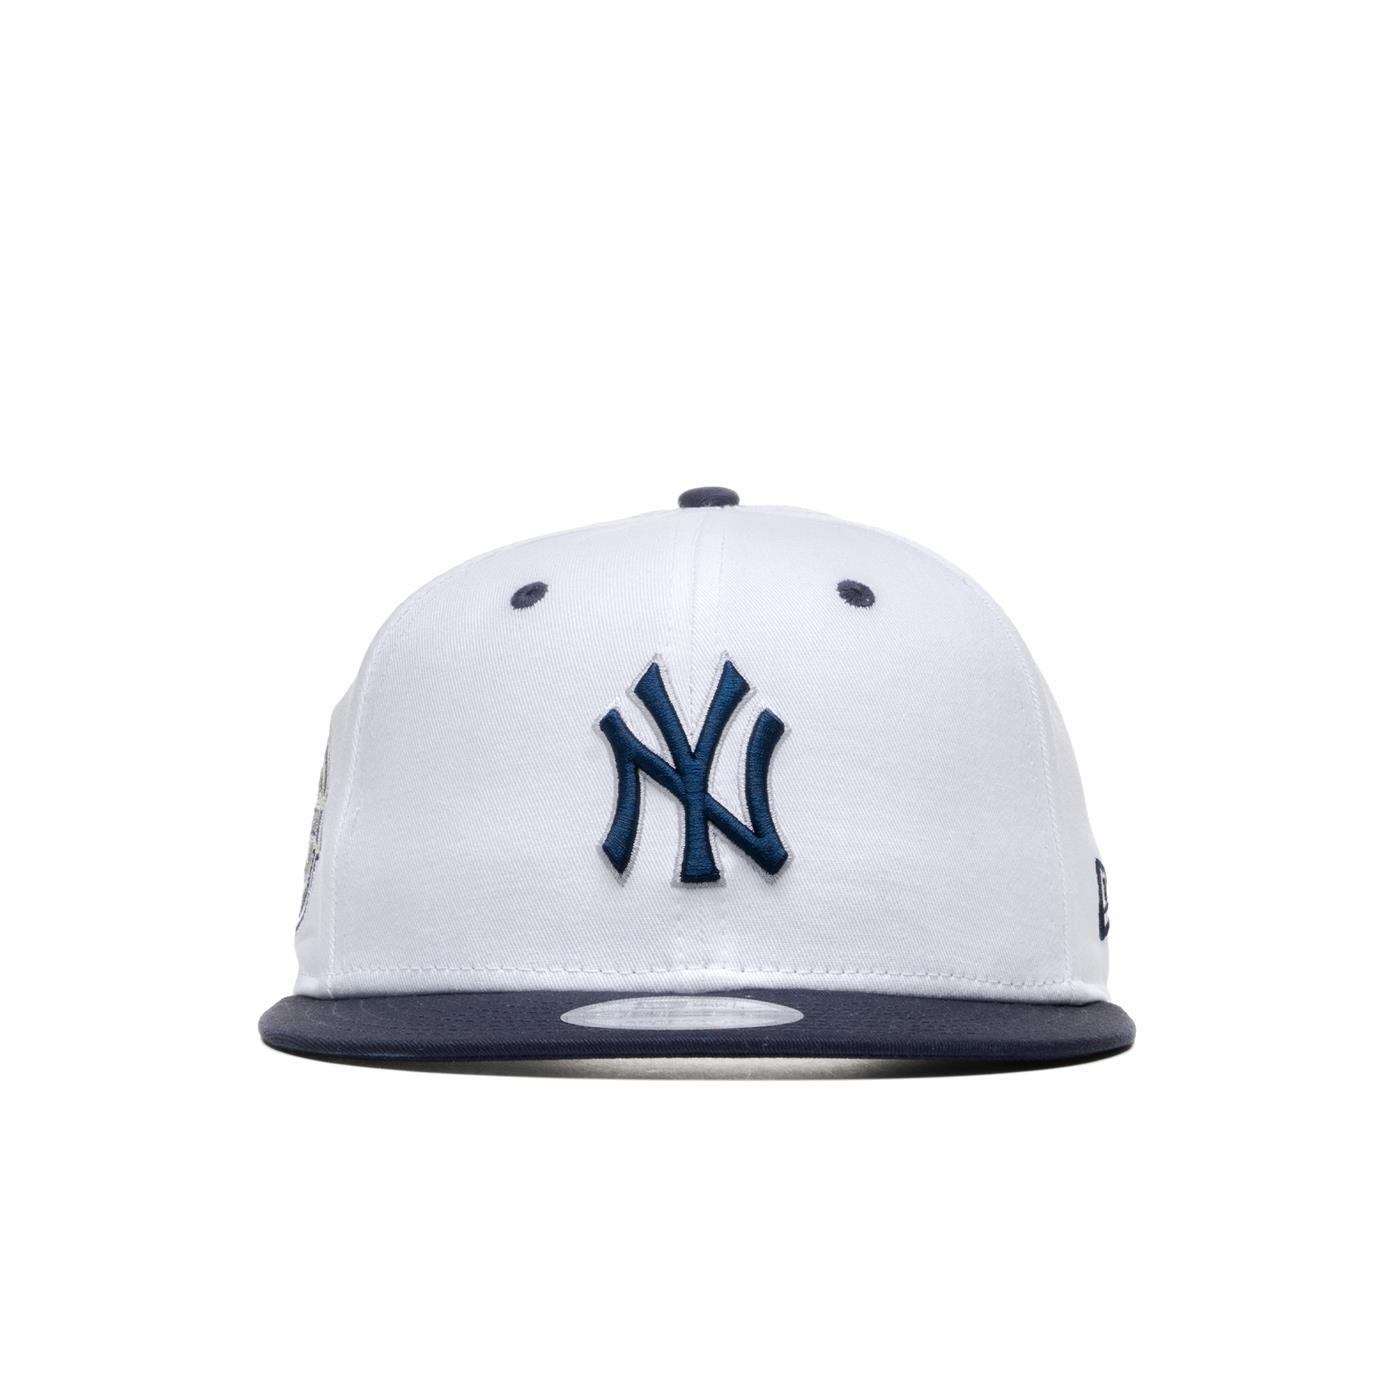 New Era NY Yankees Crown Patch 9Fifty Snapback Cap